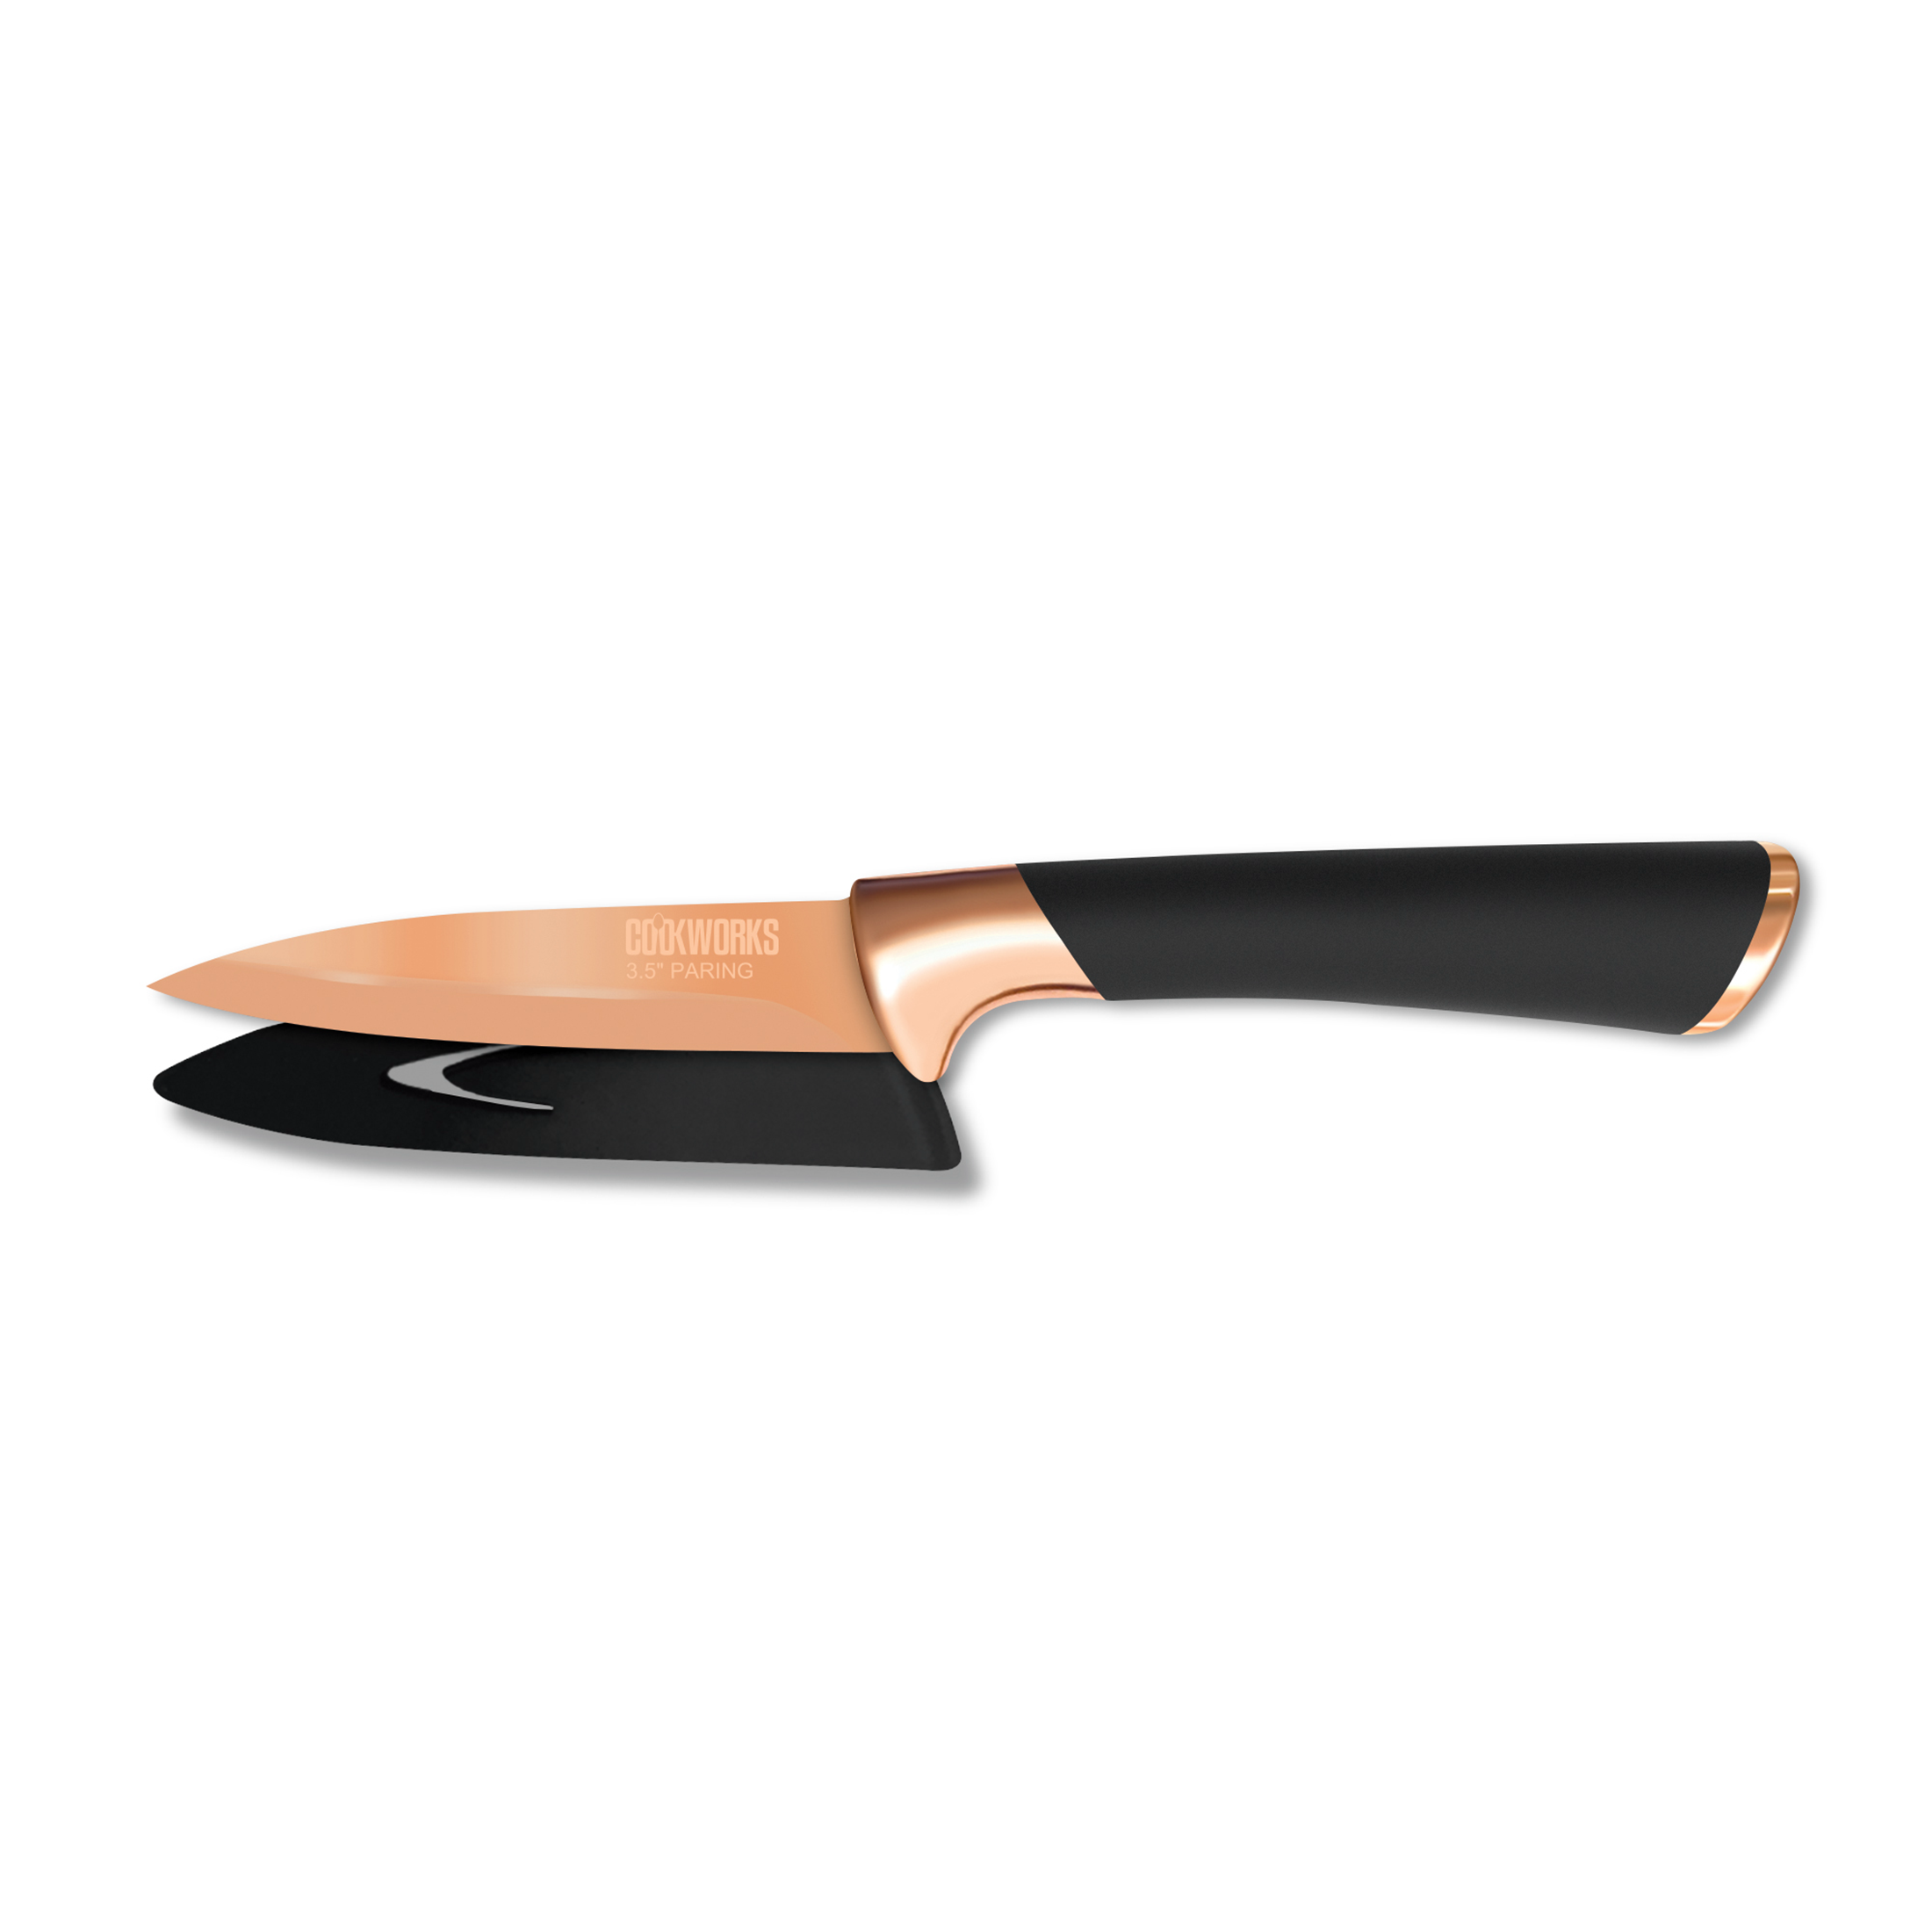 Tomodachi Chef Knife Set Kitchen Knives Complete Copper Set With Guards